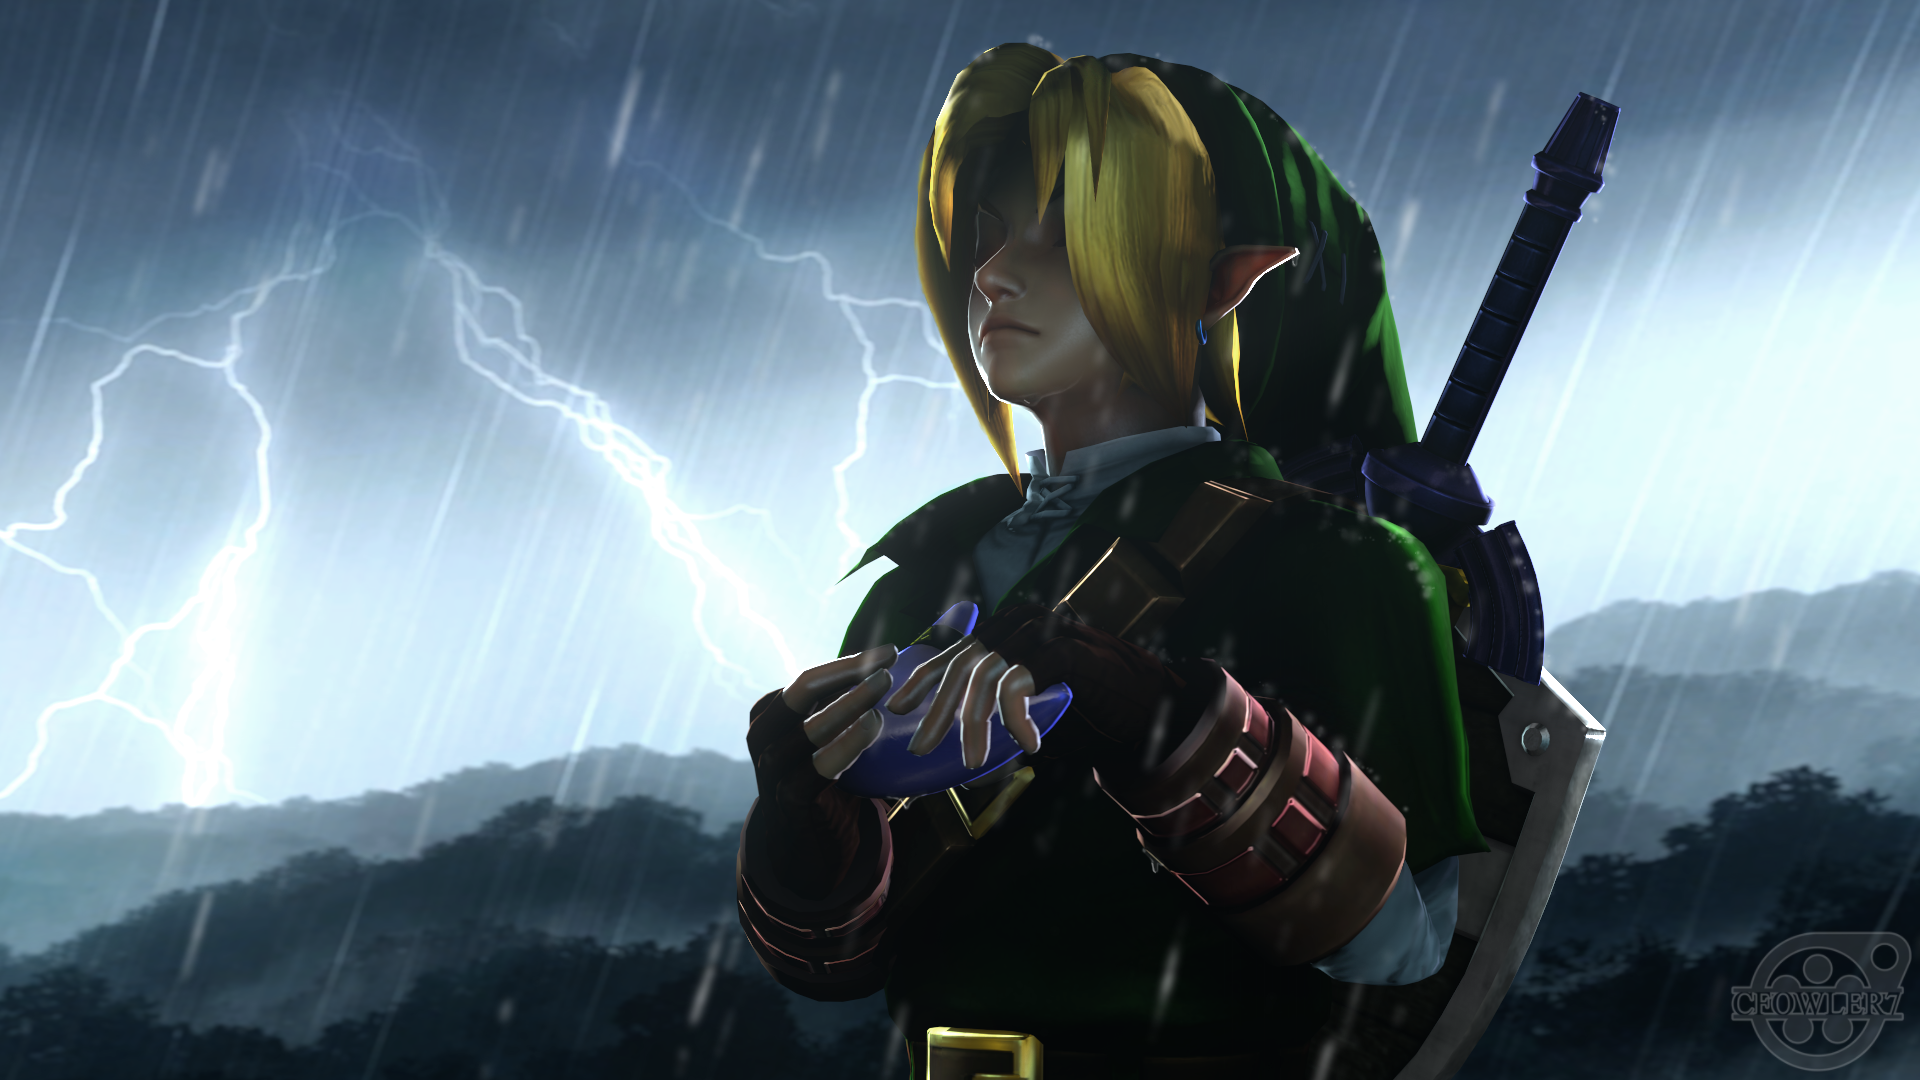 The Legend of Zelda: Ocarina of Time - Song of Storms